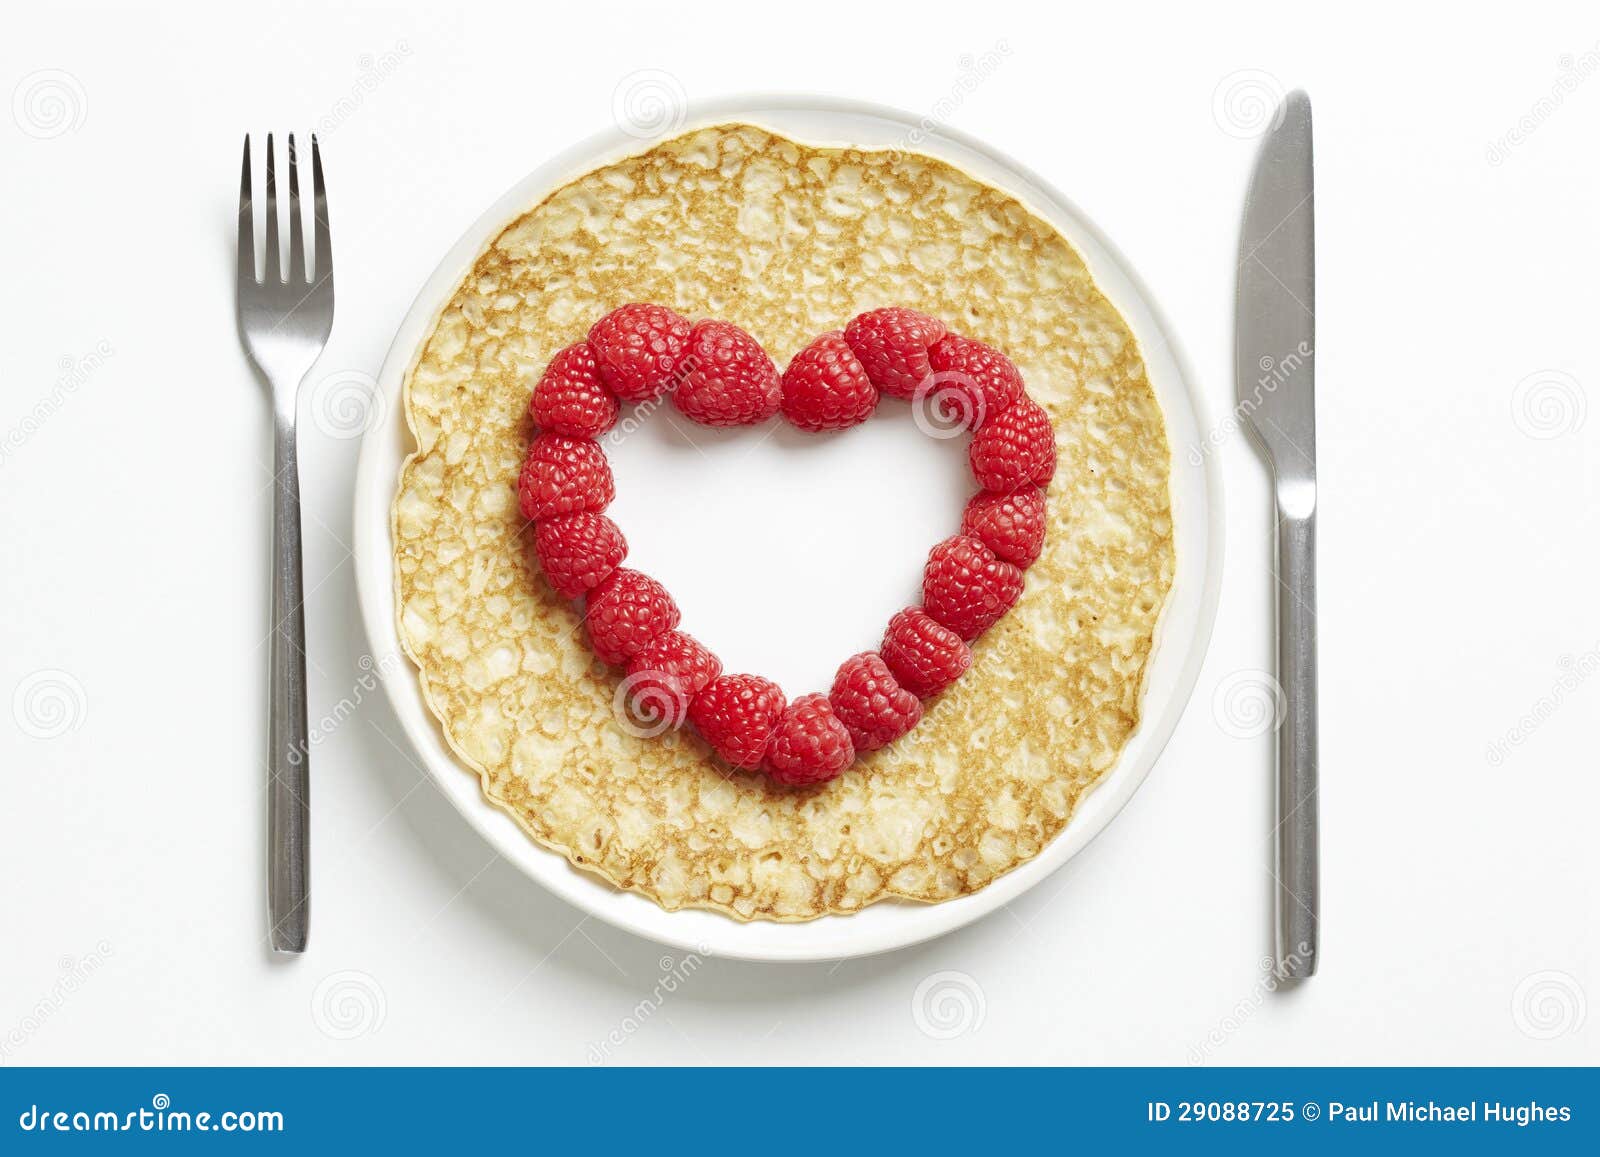 Pancake with Love Heart Shape Cut Out Stock Image - Image of festival ...